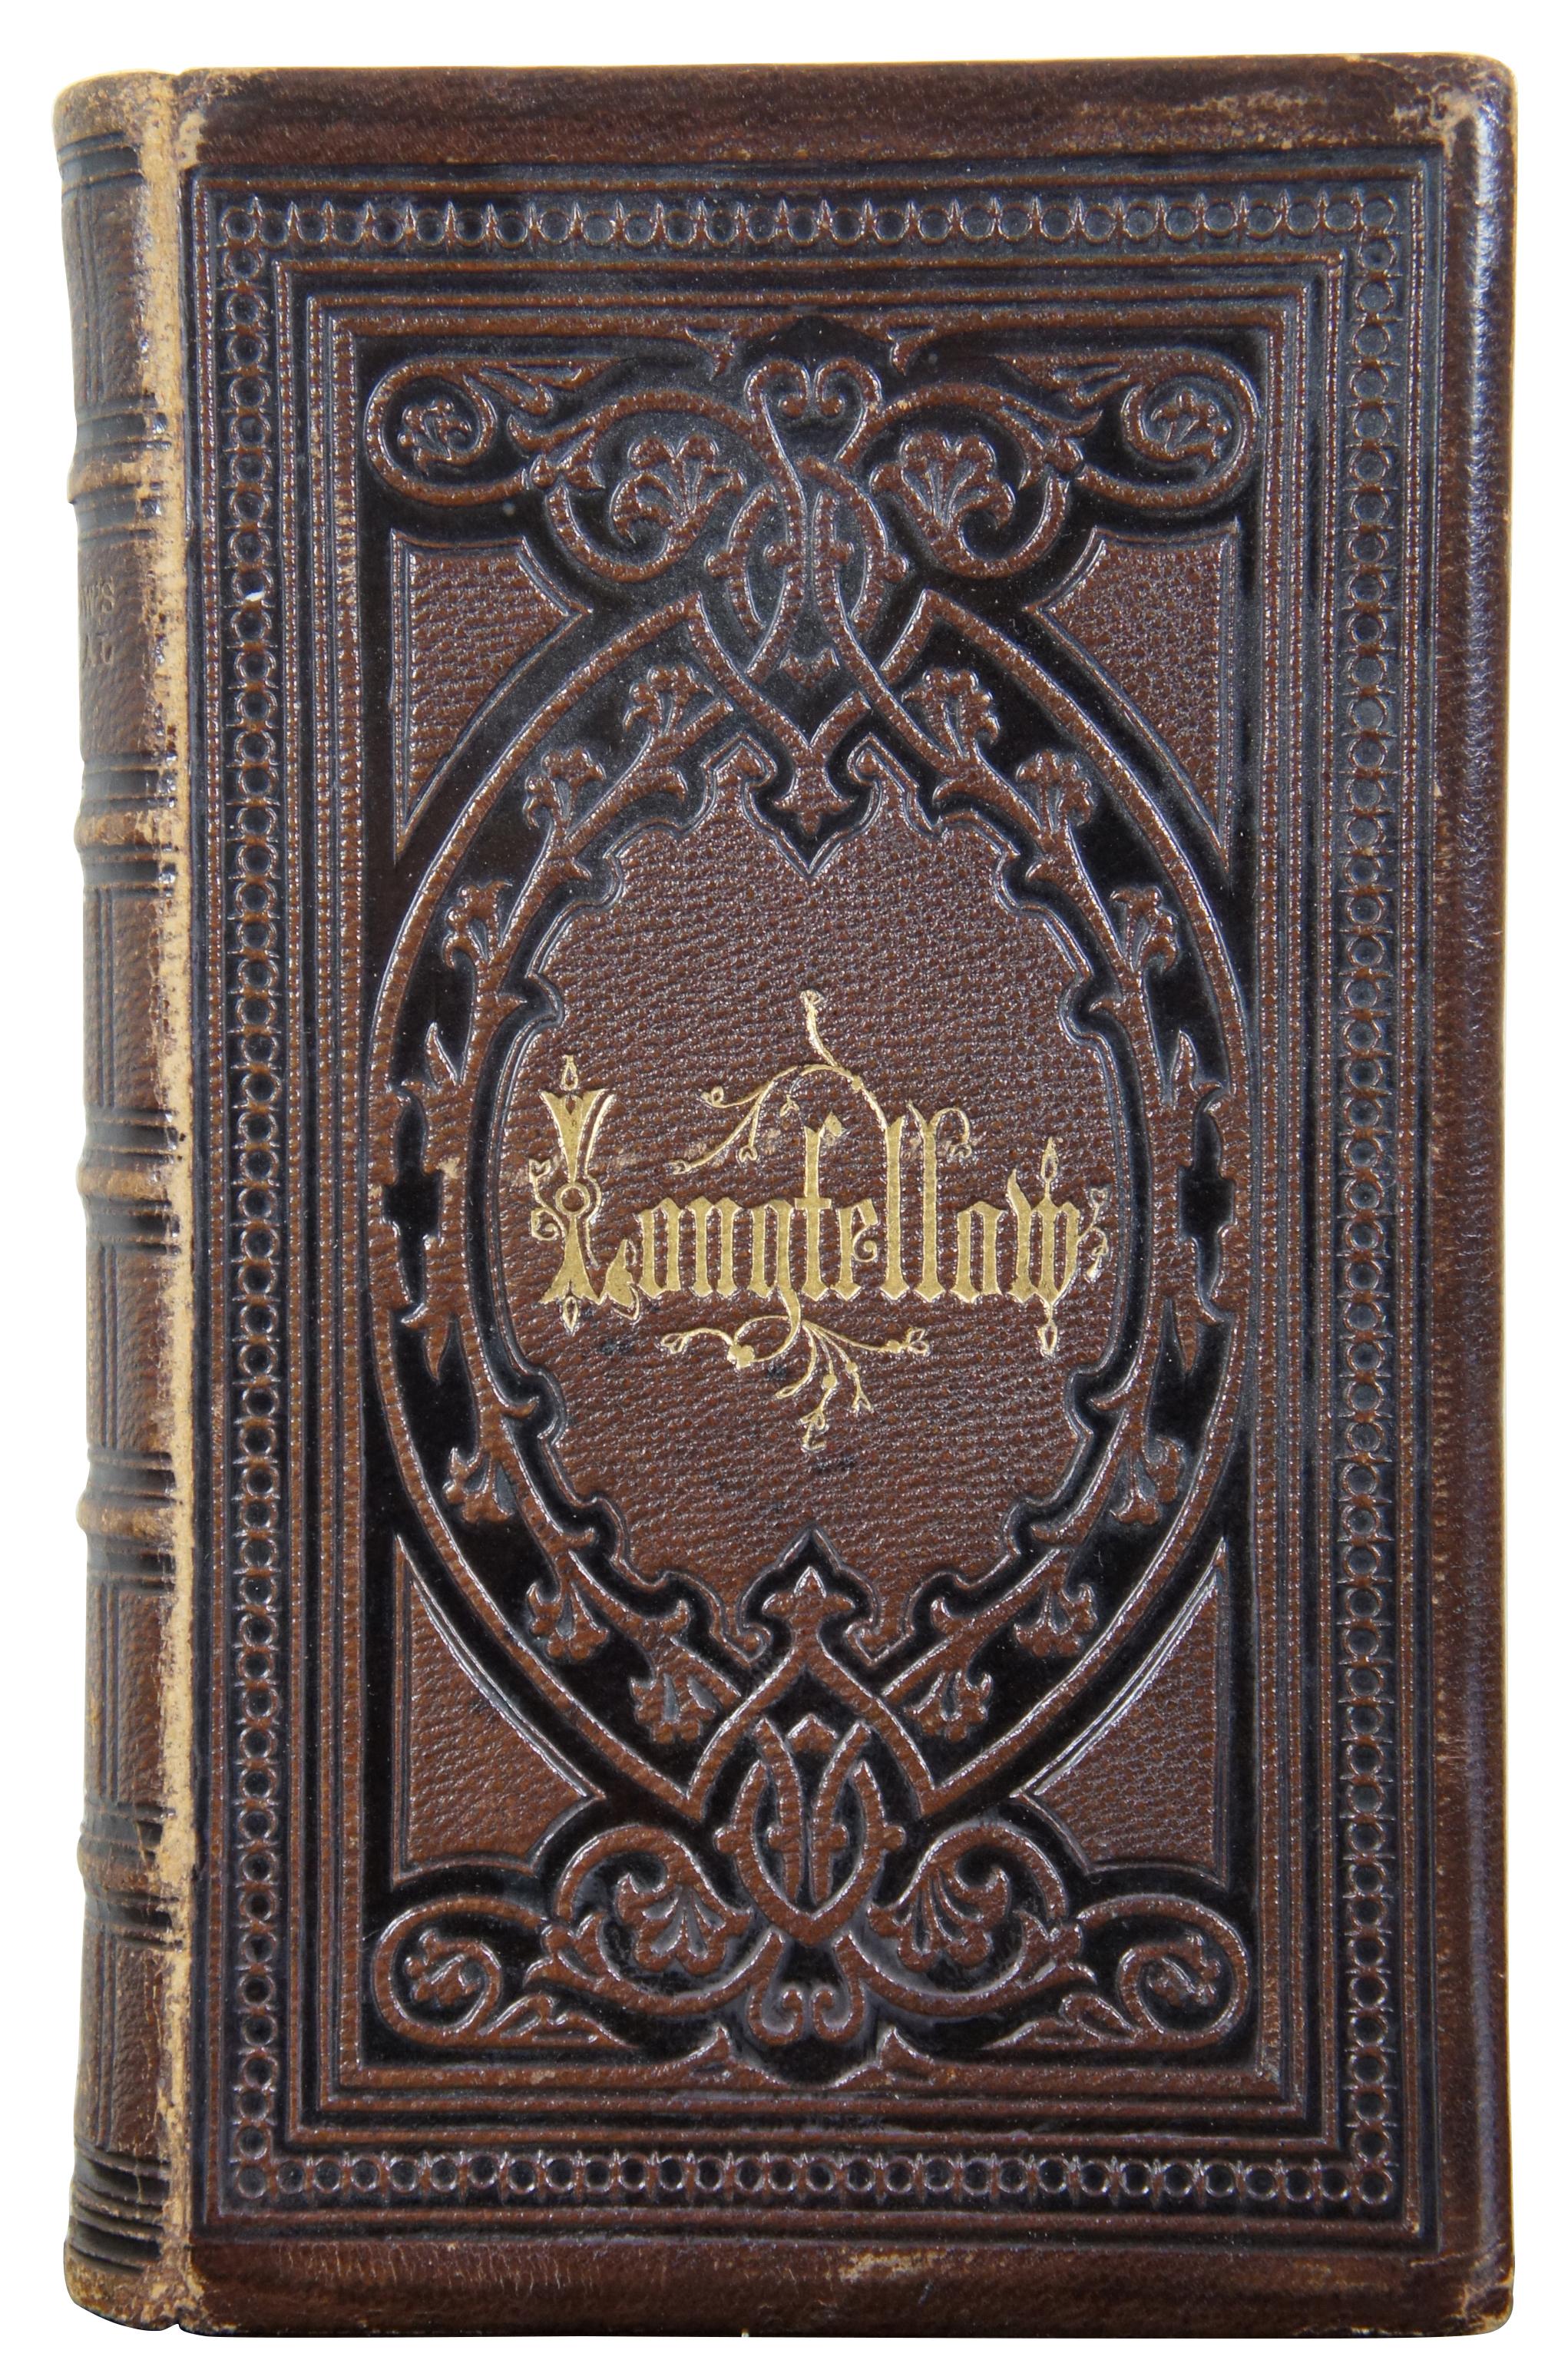 Antique embossed leather bound copy of the Poetical Works of Henry Wadsworth Longfellow, published by T. Nelson & Sons, London in 1859. Complete with illustrations and a hand signed note from 1860. Measure: 7